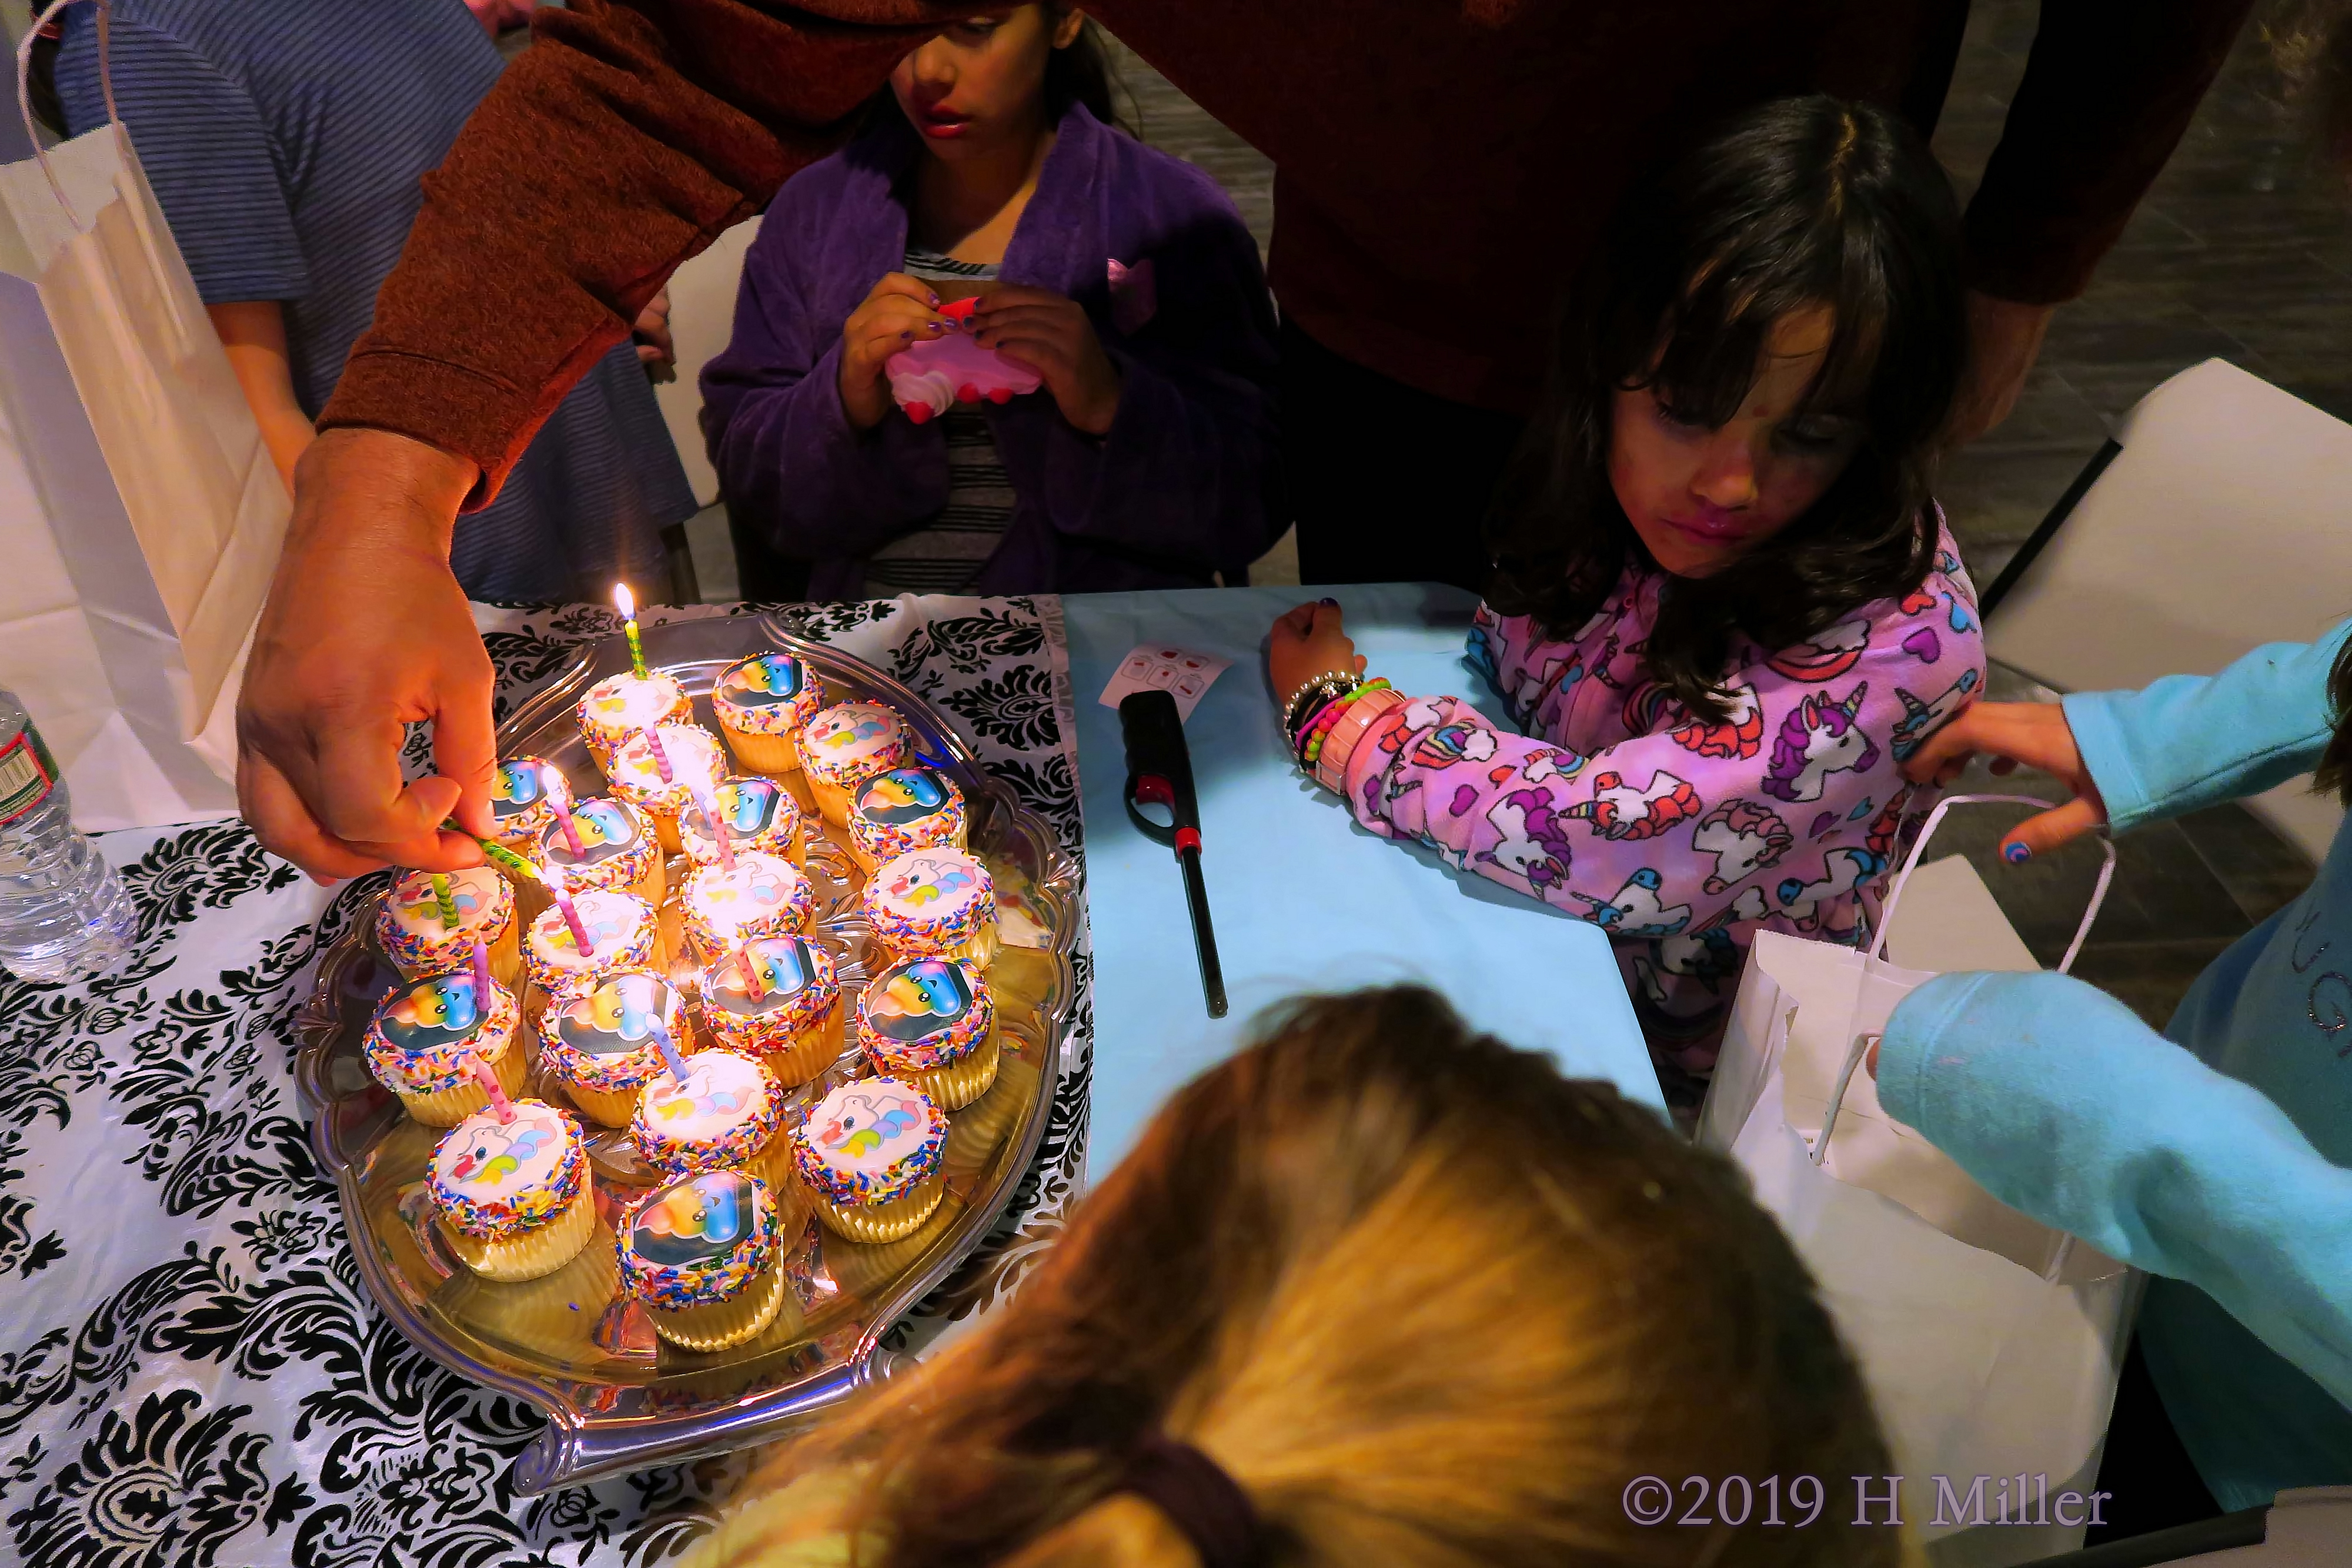 Plates Of Frosted Cupcakes With Candles On Top! Birthday Party Wishes At The Kids Spa Birthday 4